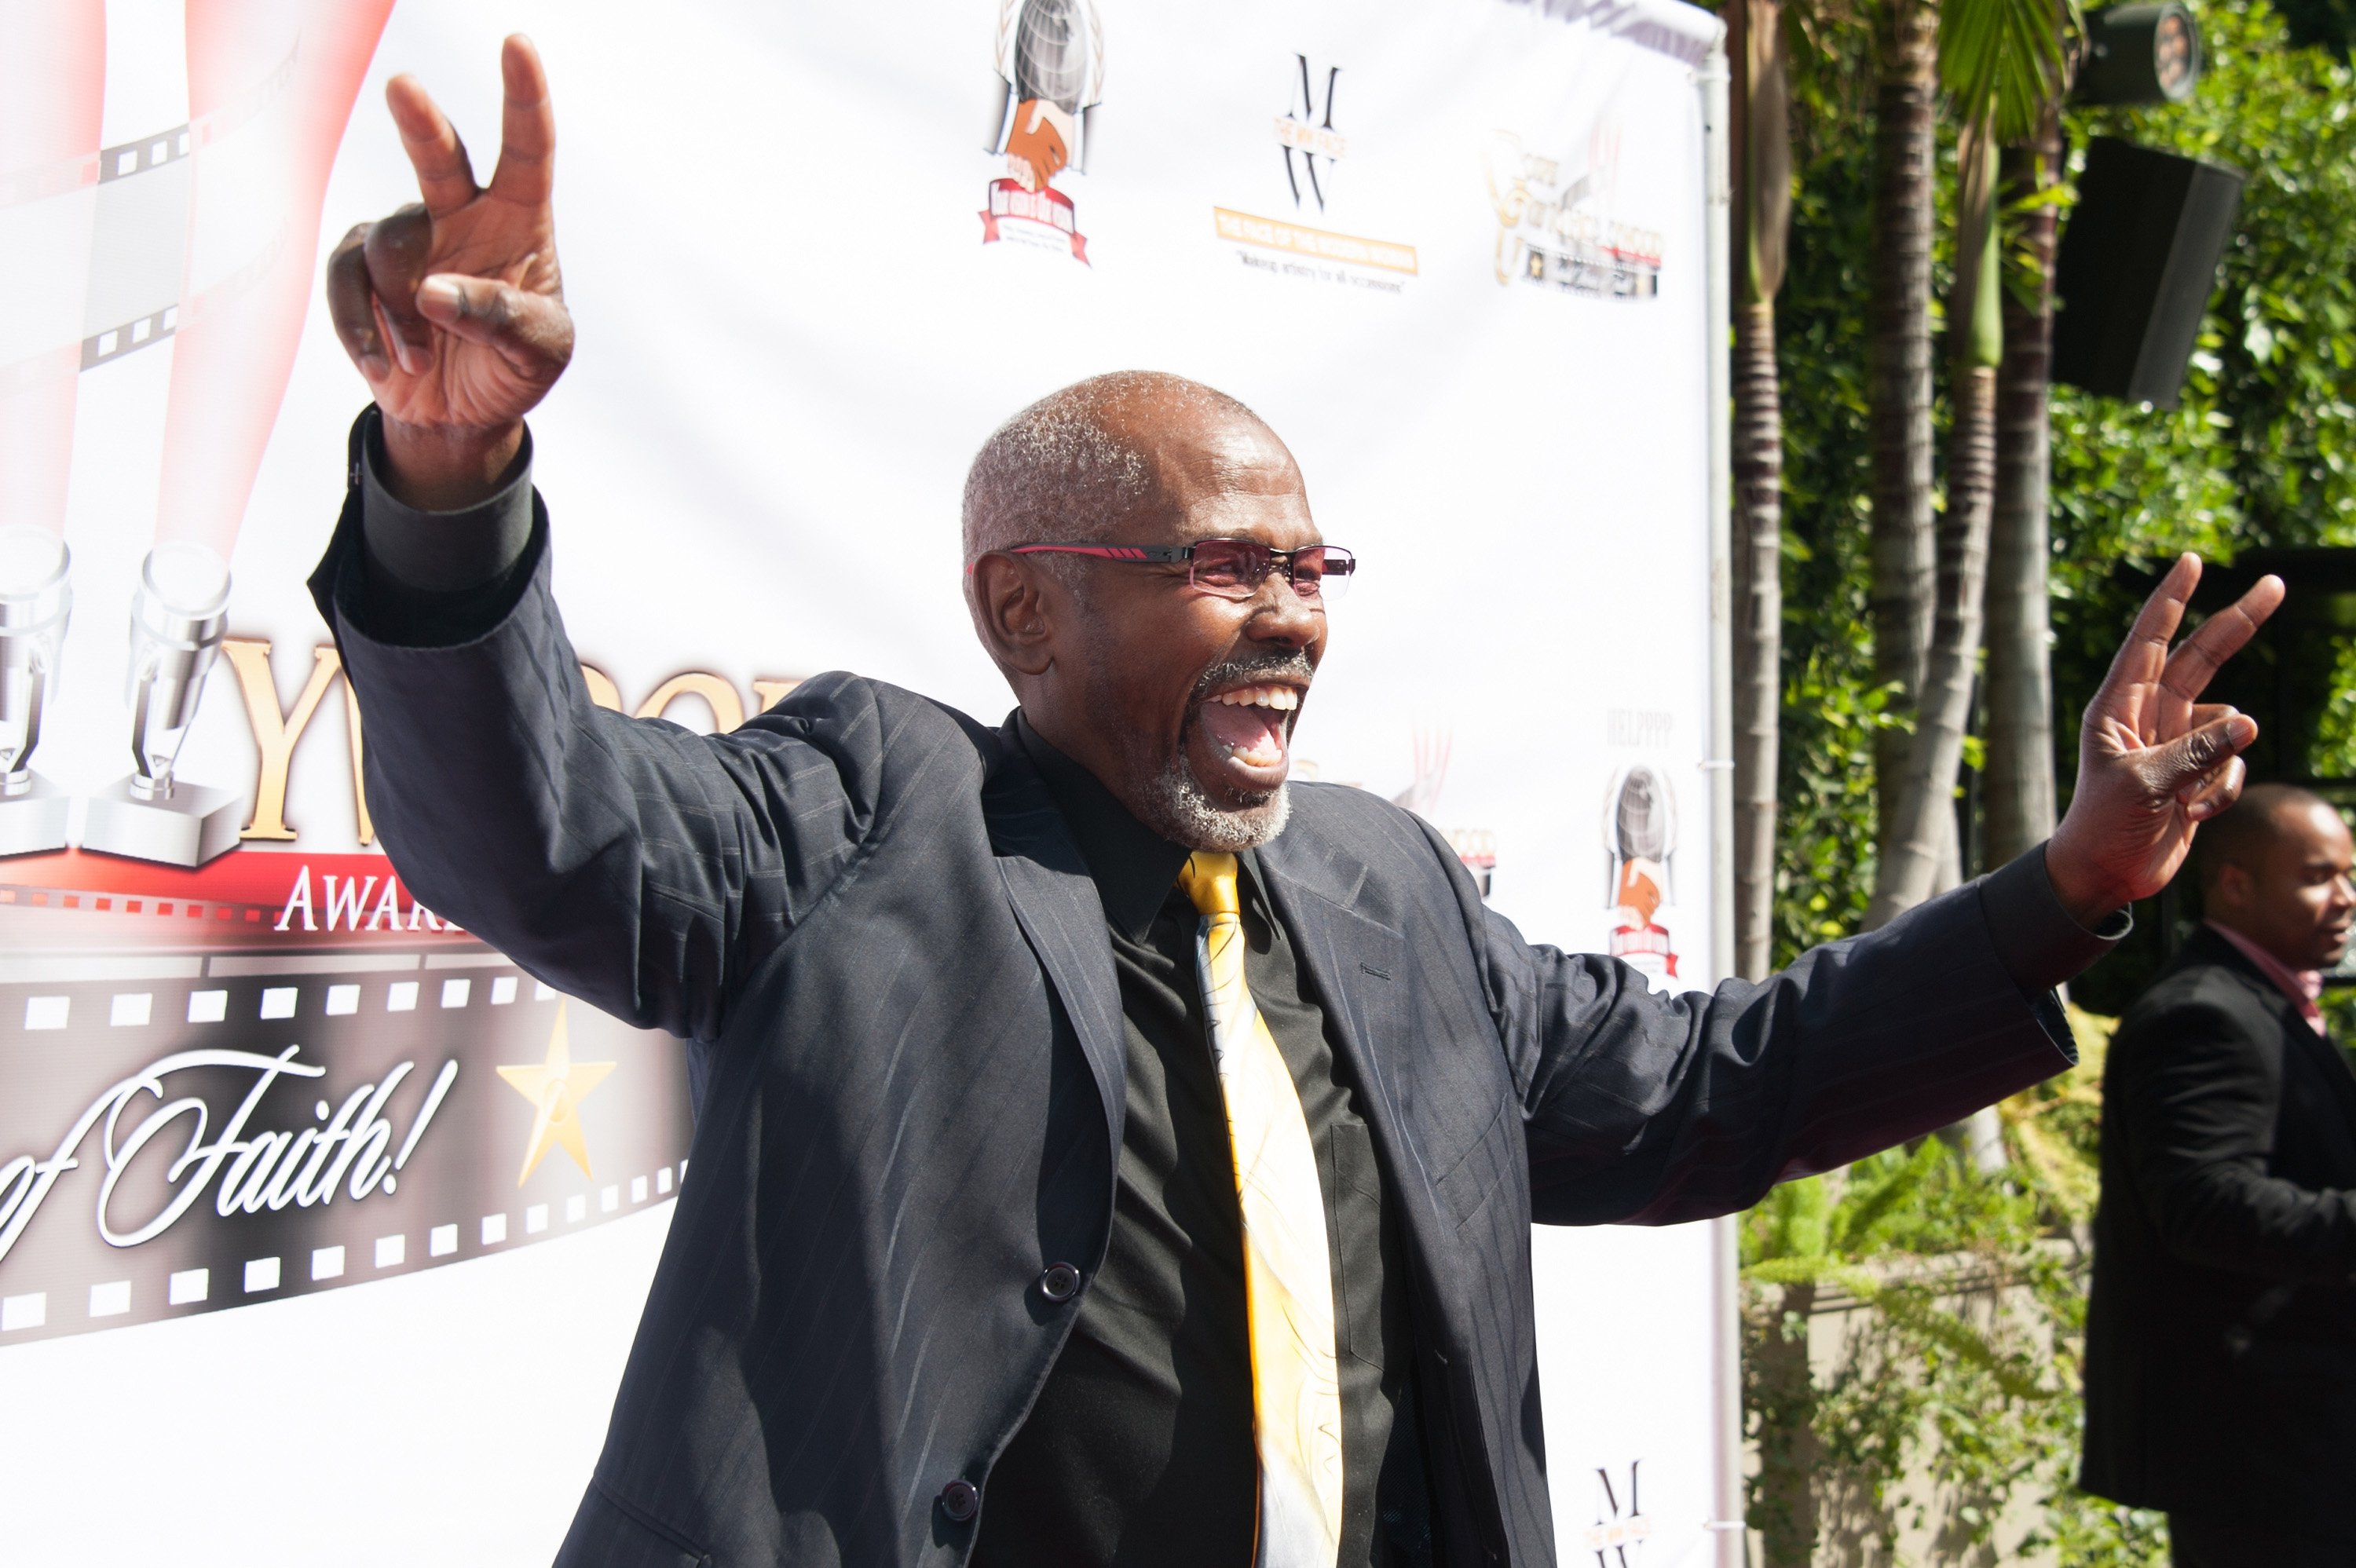 Actor Ernest Lee Thomas arrives at the Gospel Goes To Hollywood event at the Vibiana on February 26, 2016. | Photo: Getty Images